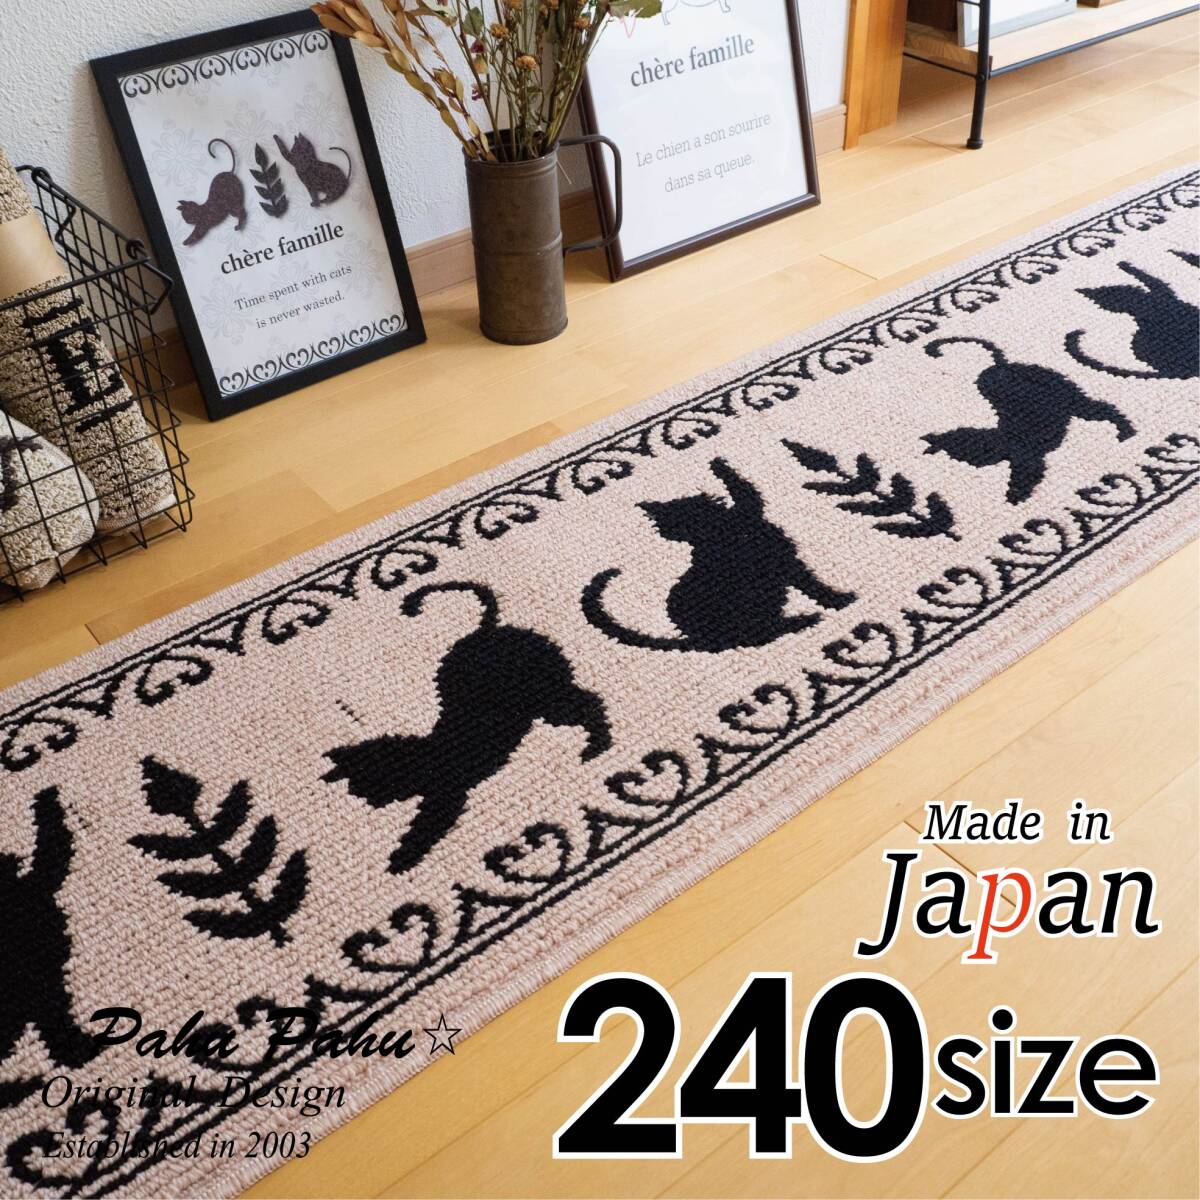  free shipping 45x240 * new goods made in Japan * kitchen mat cat pattern cat DC pink 